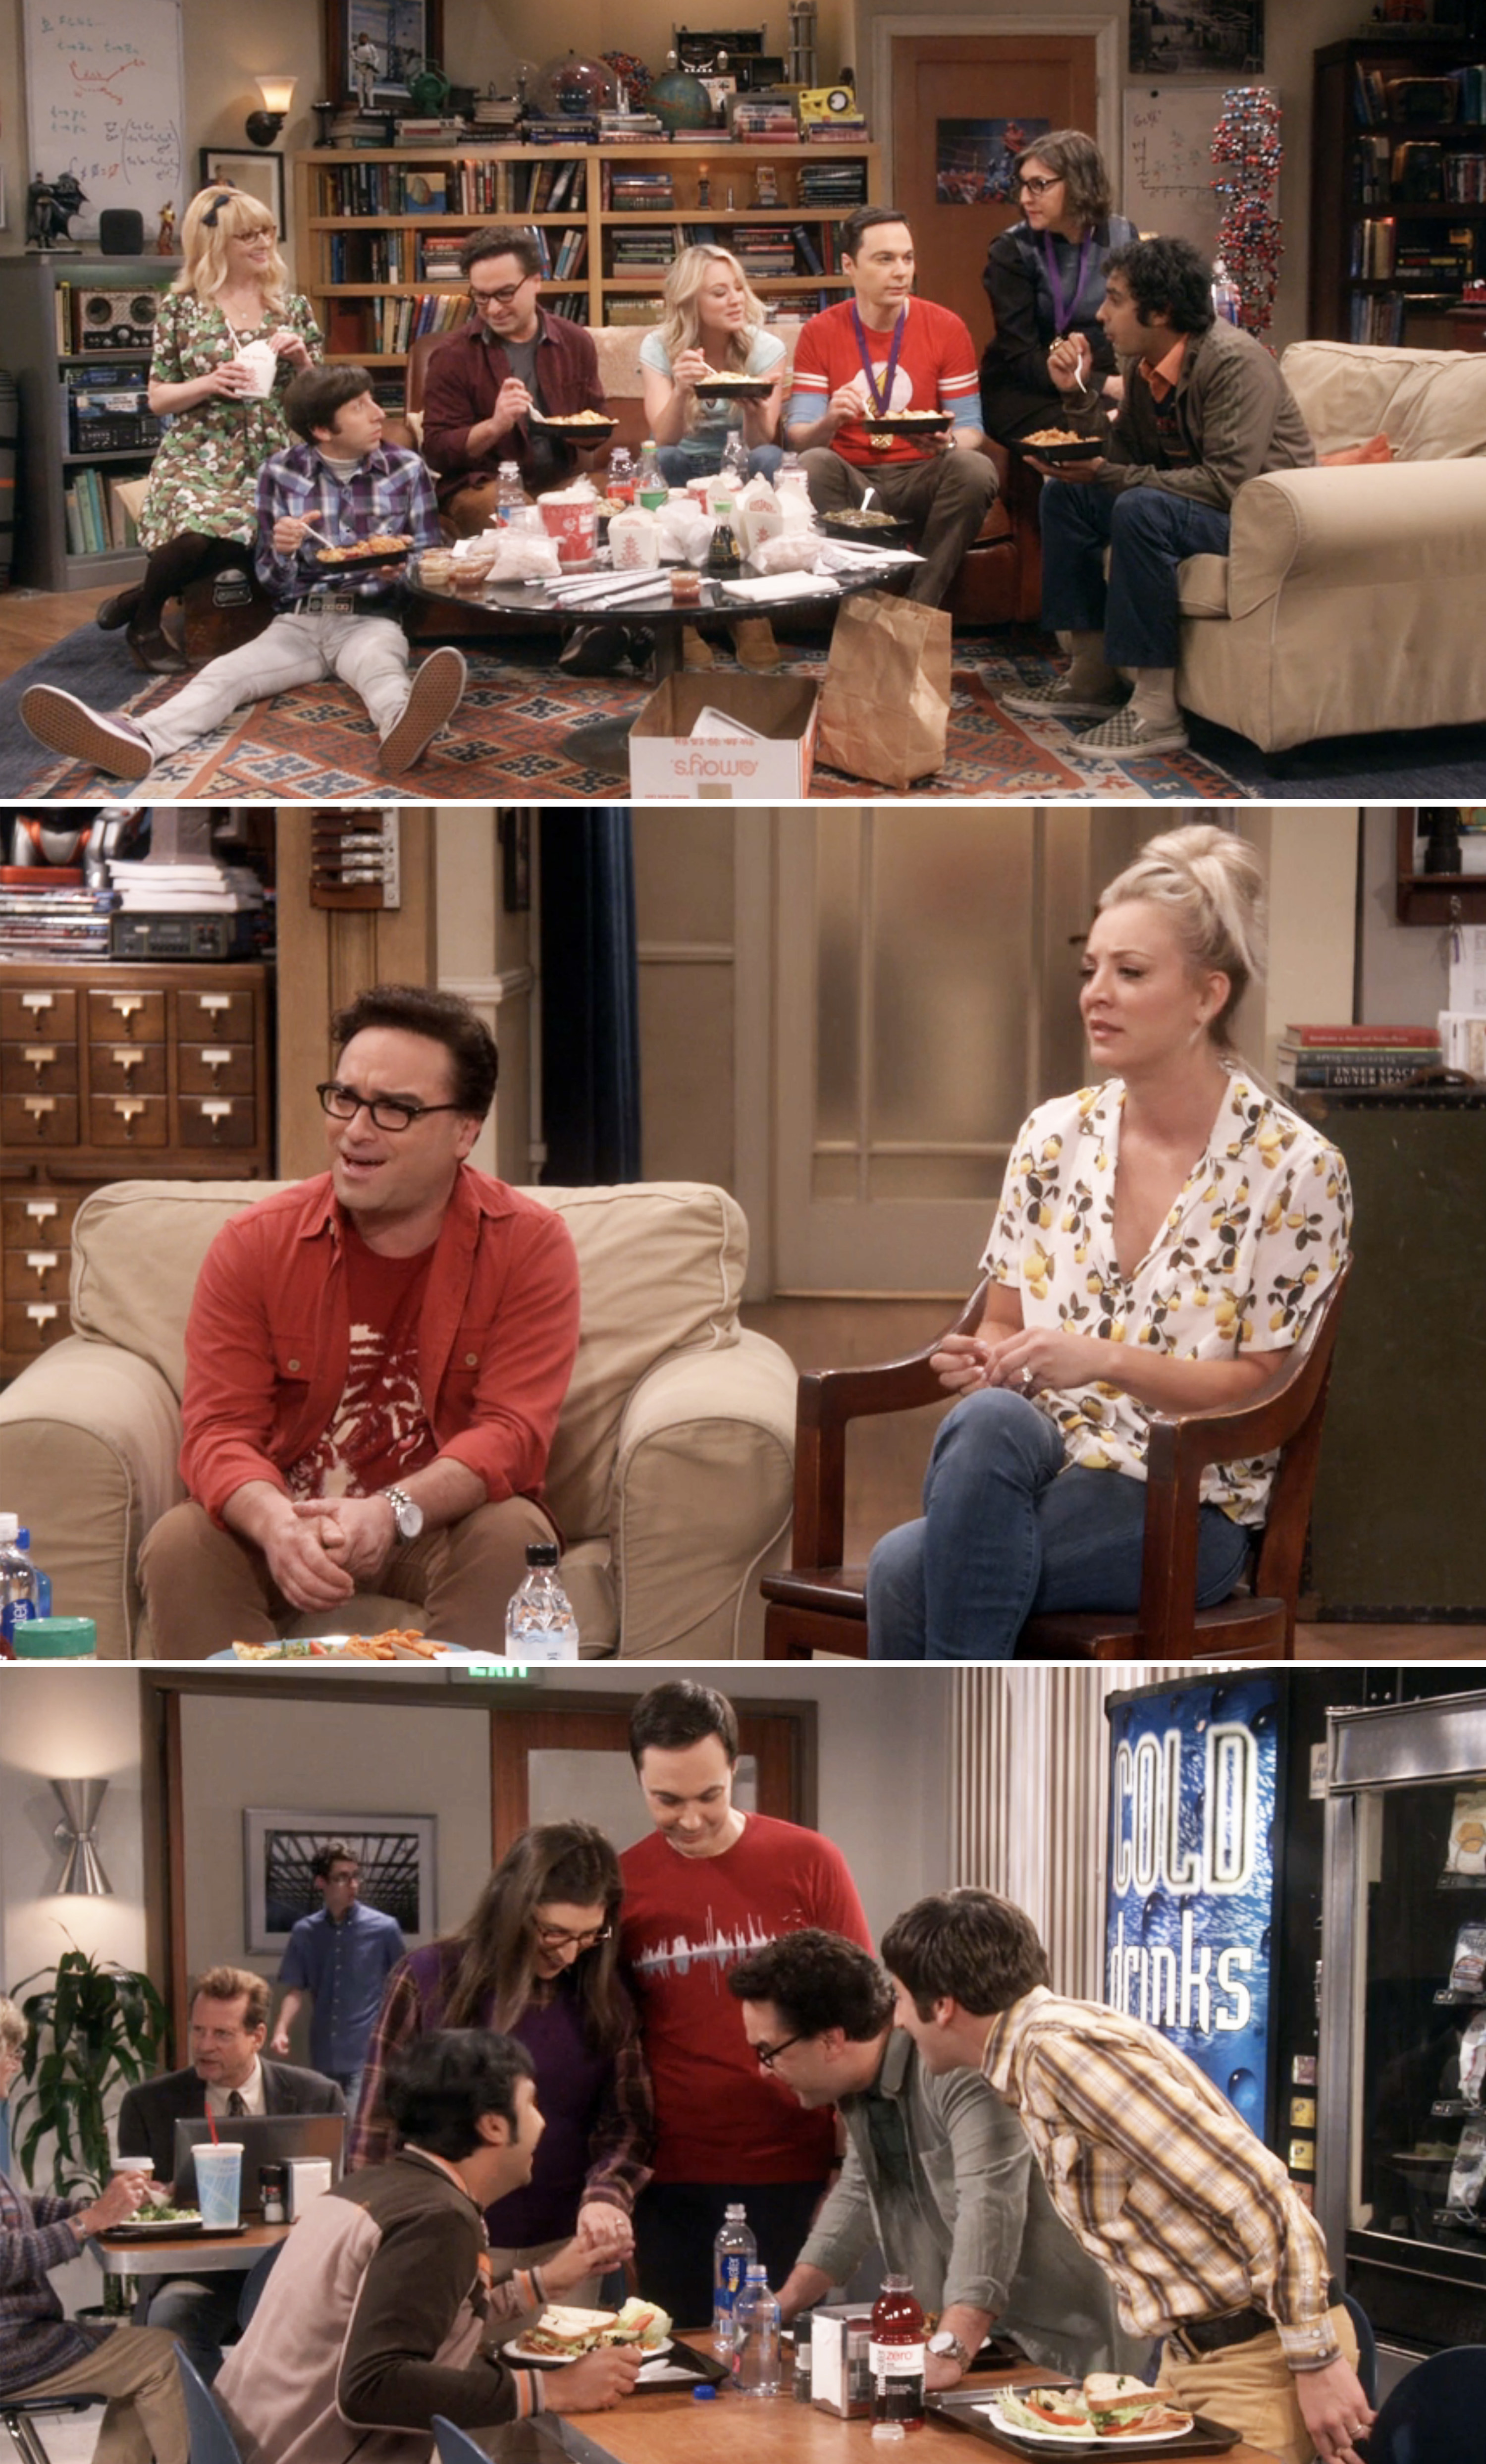 Scenes from The Big Bang Theory